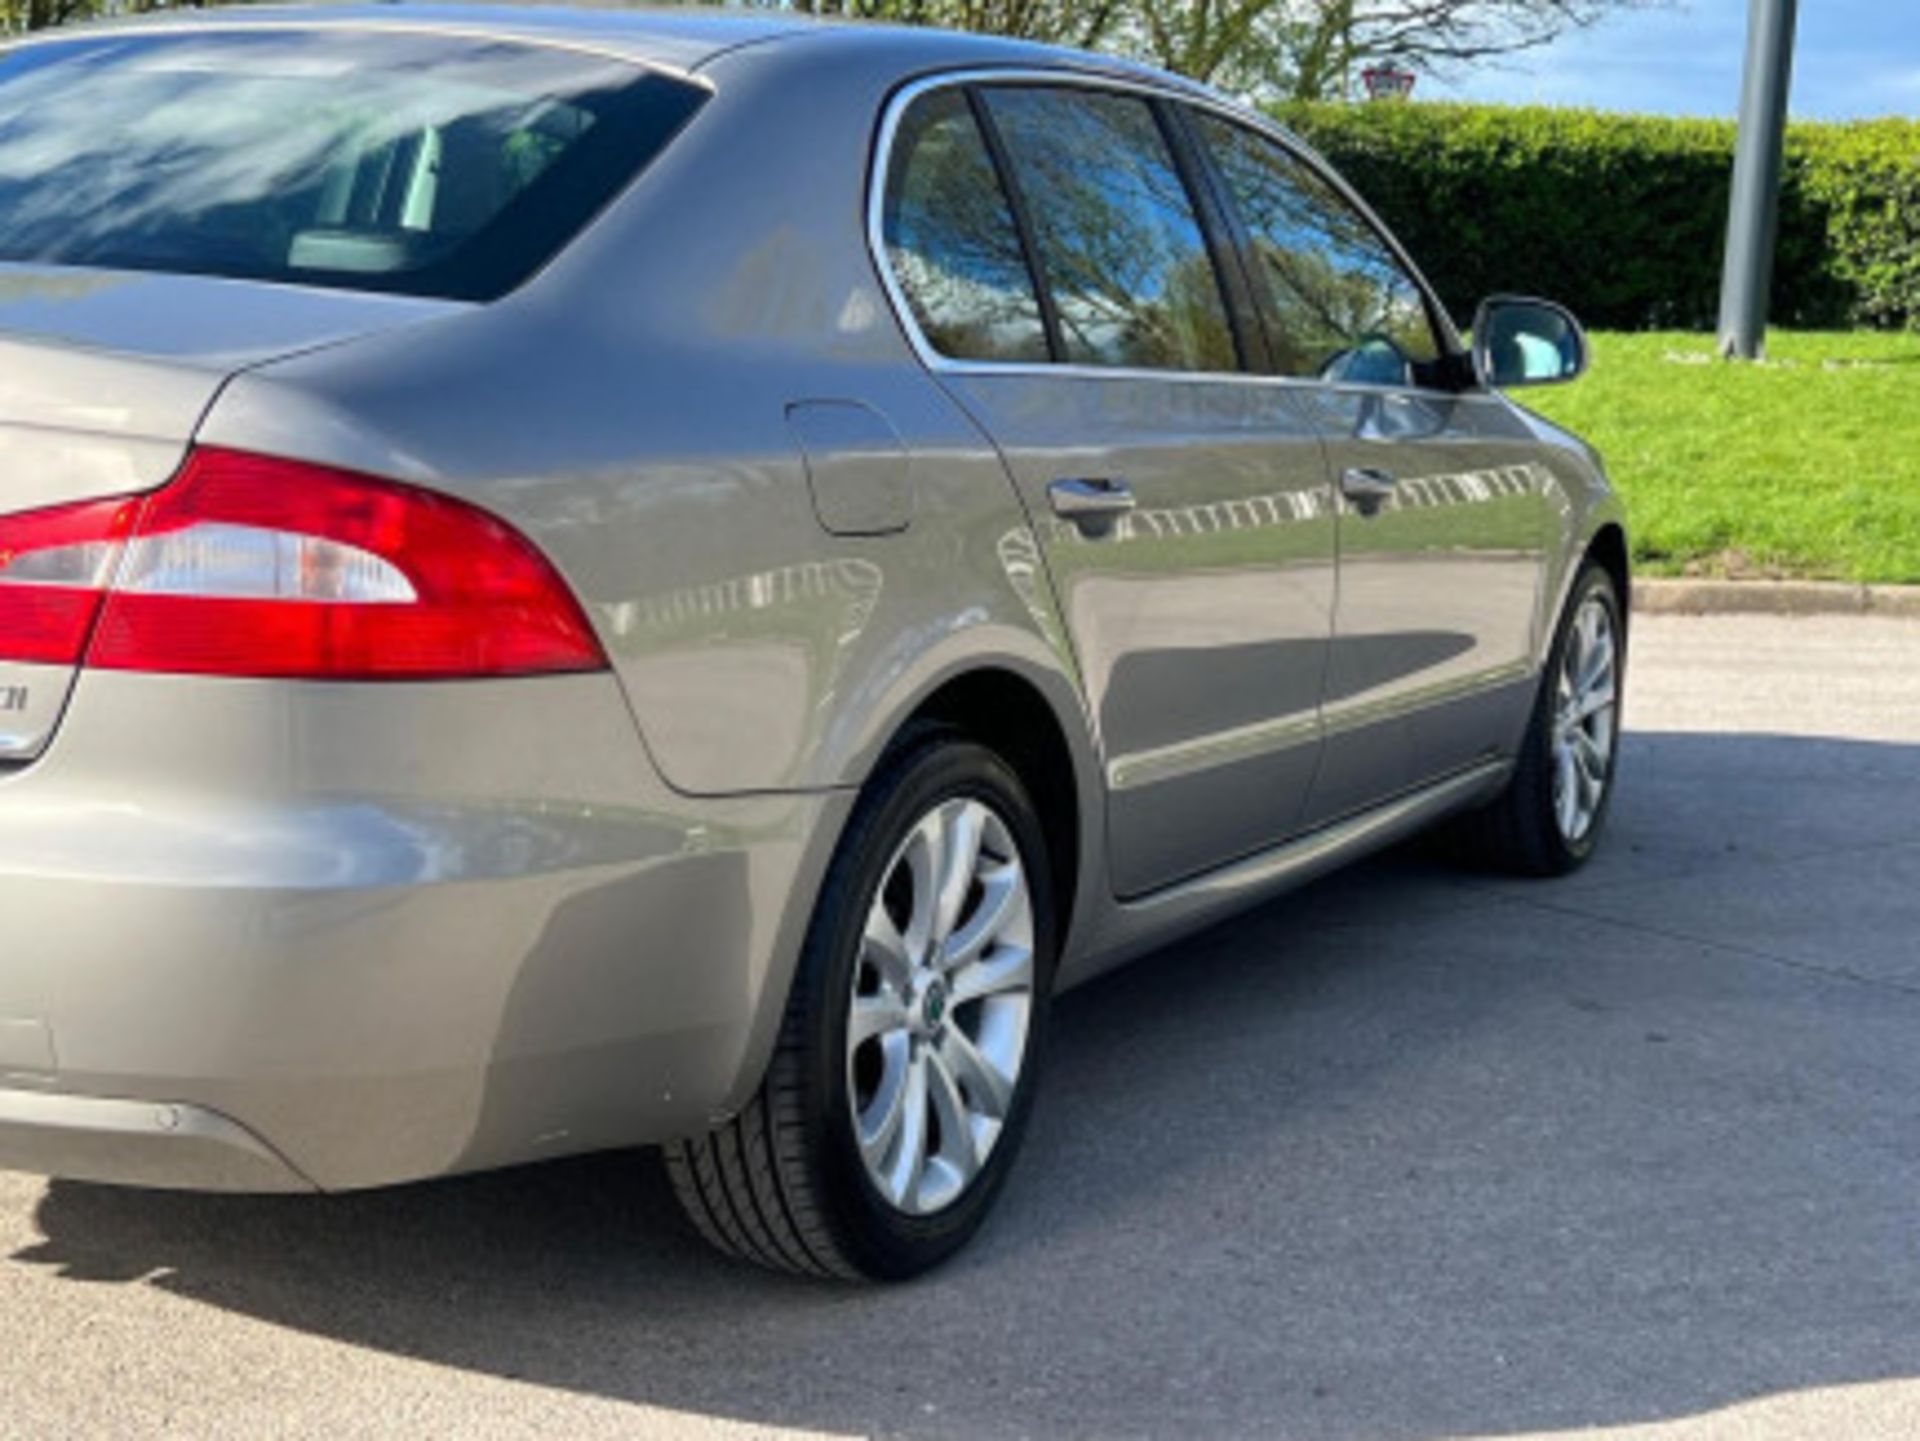 >>--NO VAT ON HAMMER--<<STYLISH AND RELIABLE SKODA SUPERB 1.6 TDI S GREENLINE II EURO 5 - Image 52 of 141